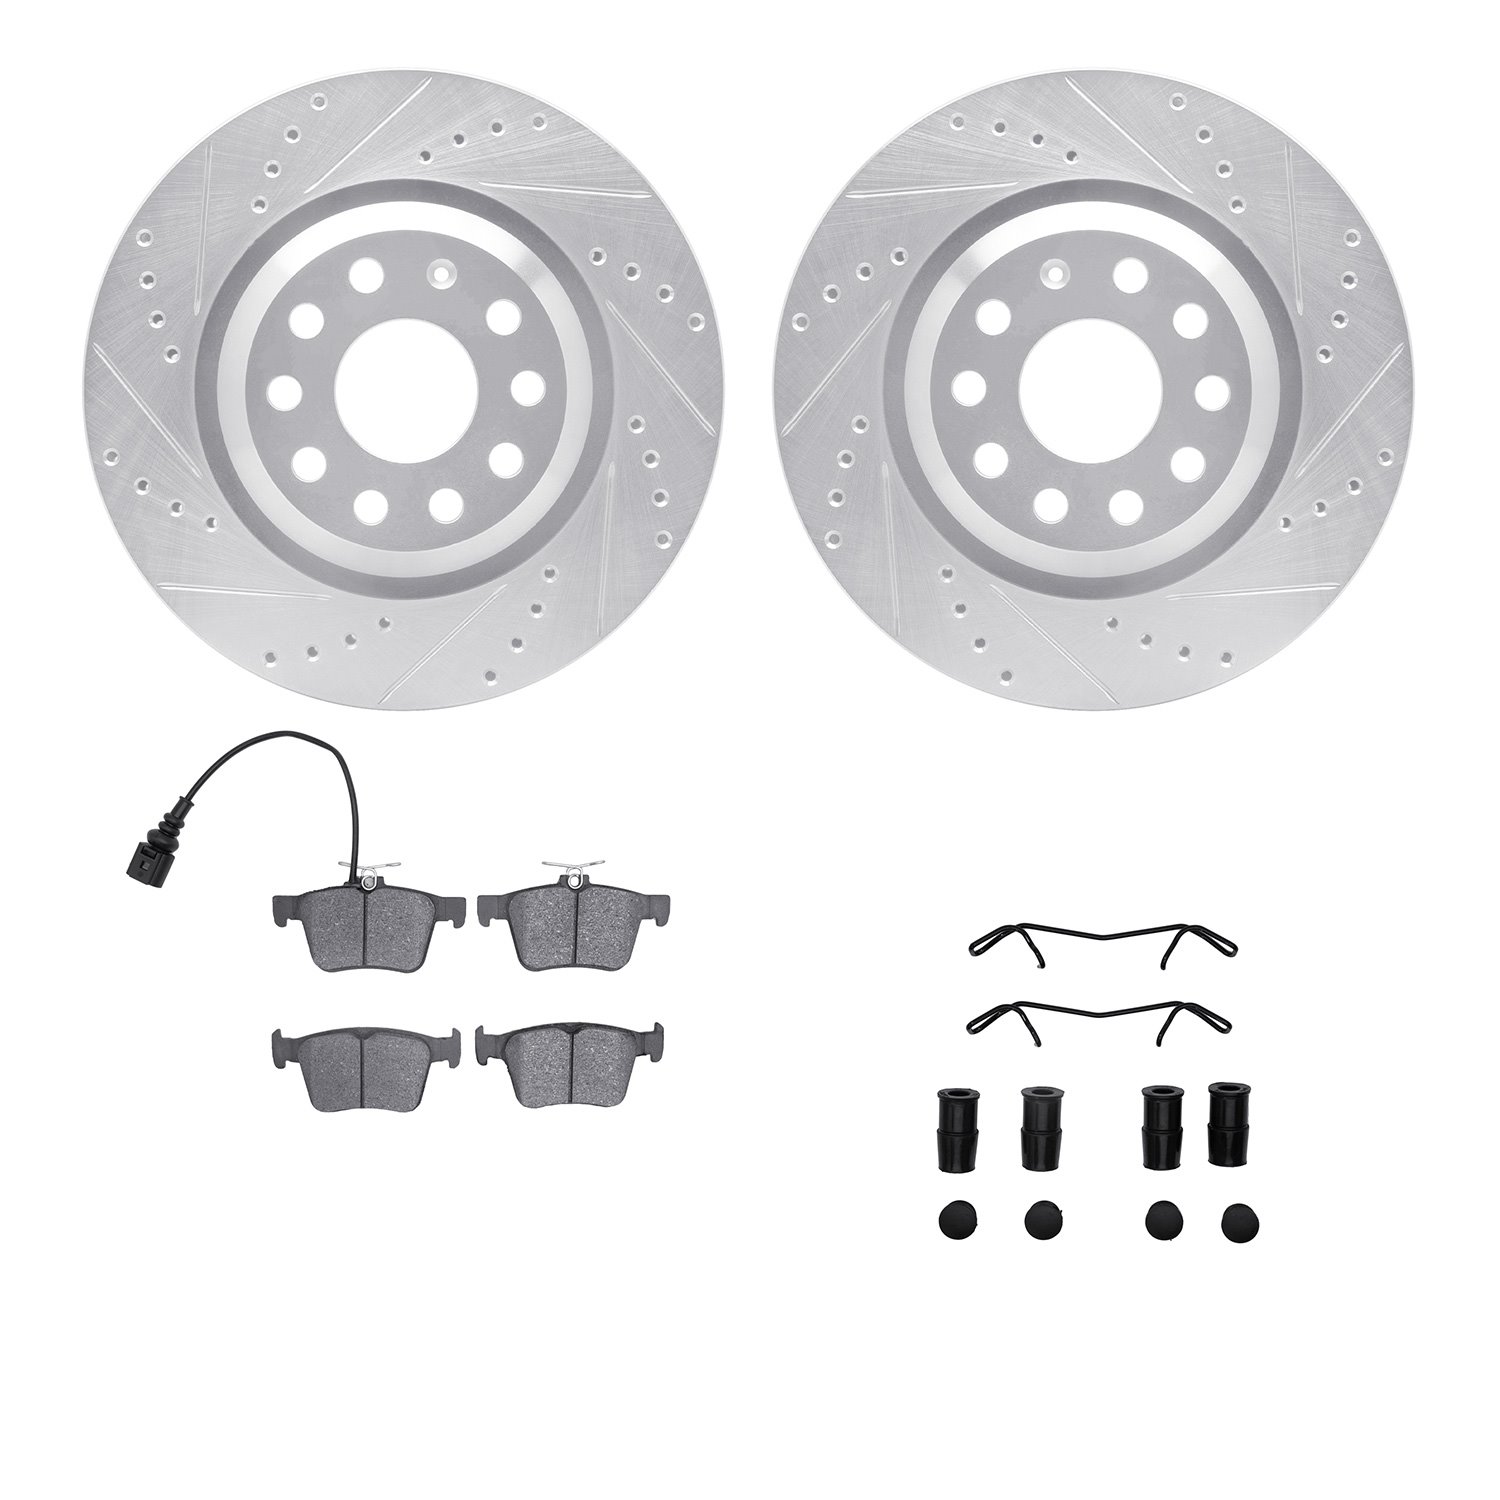 7512-74061 Drilled/Slotted Brake Rotors w/5000 Advanced Brake Pads Kit & Hardware [Silver], Fits Select Audi/Volkswagen, Positio